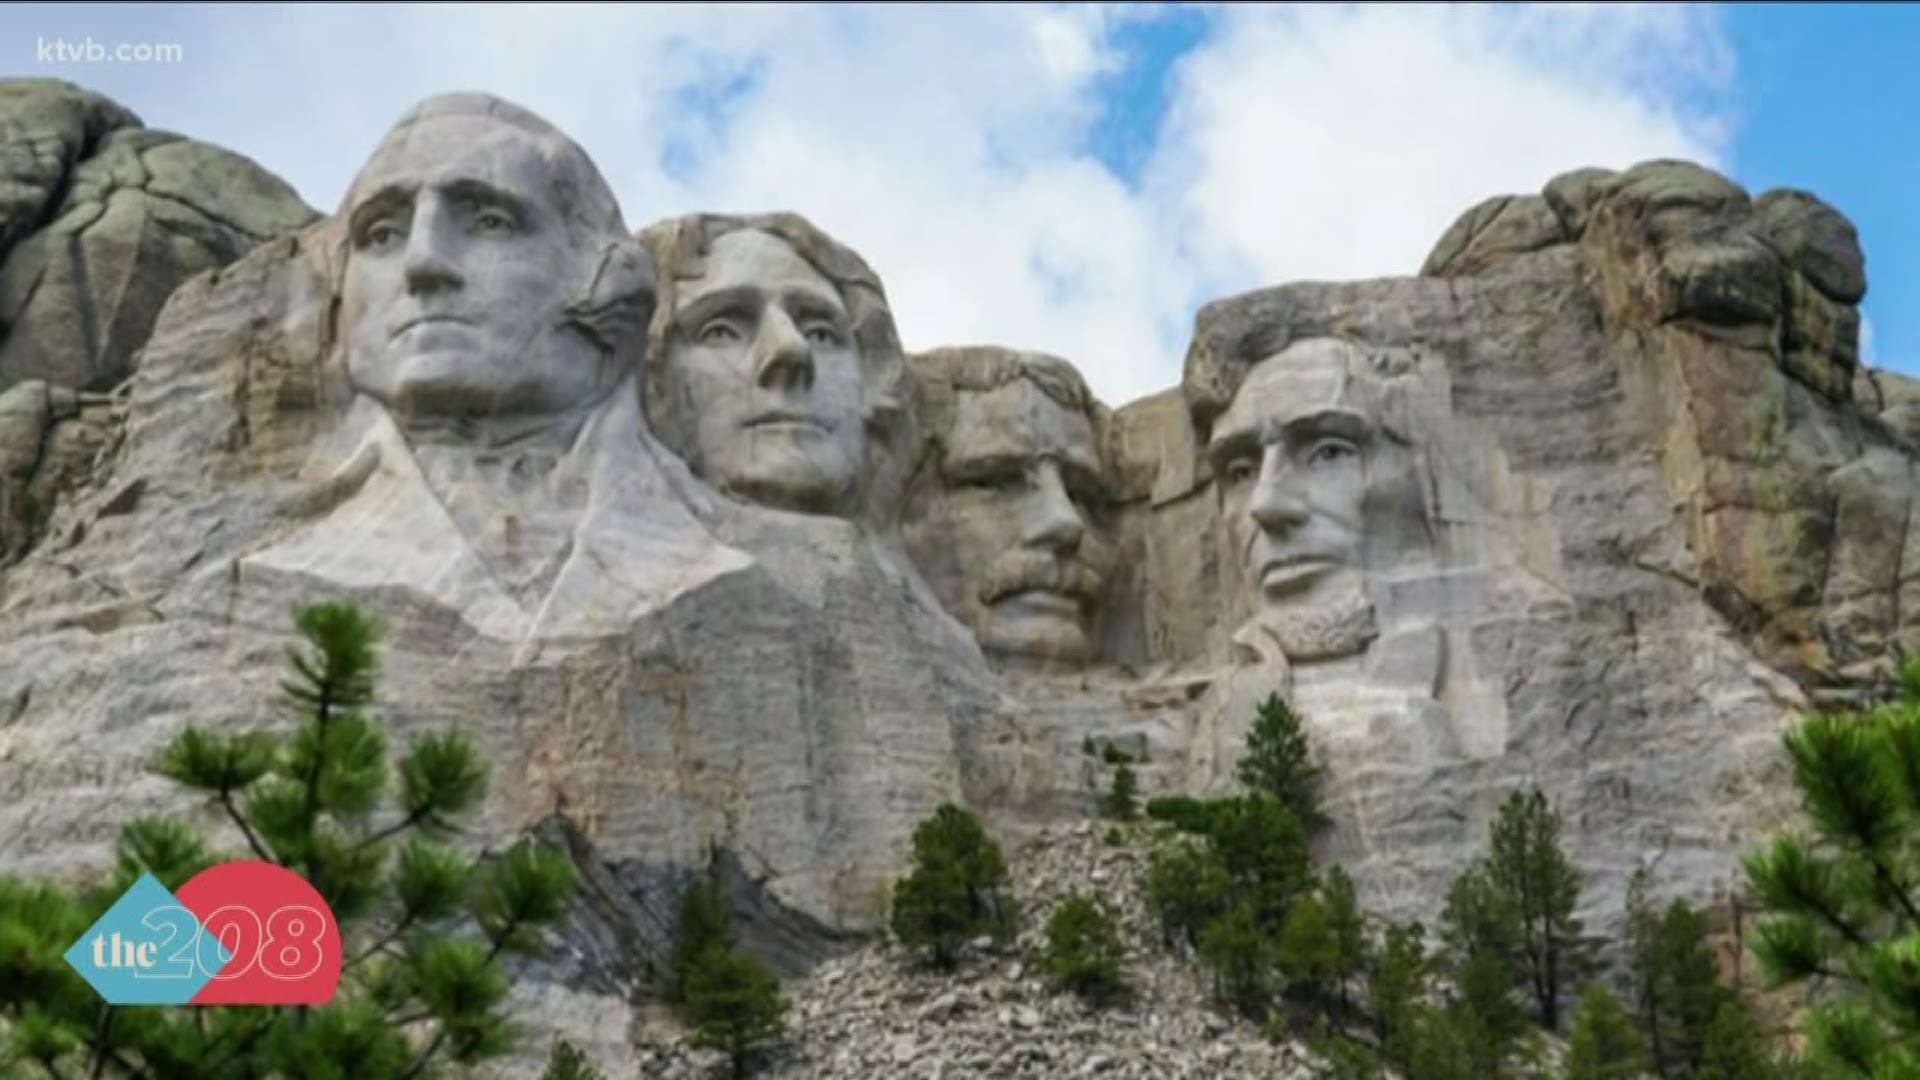 From a small cabin in southeastern Idaho, Gutzon de la Mothe Borglum carved one of America's most iconic monuments.